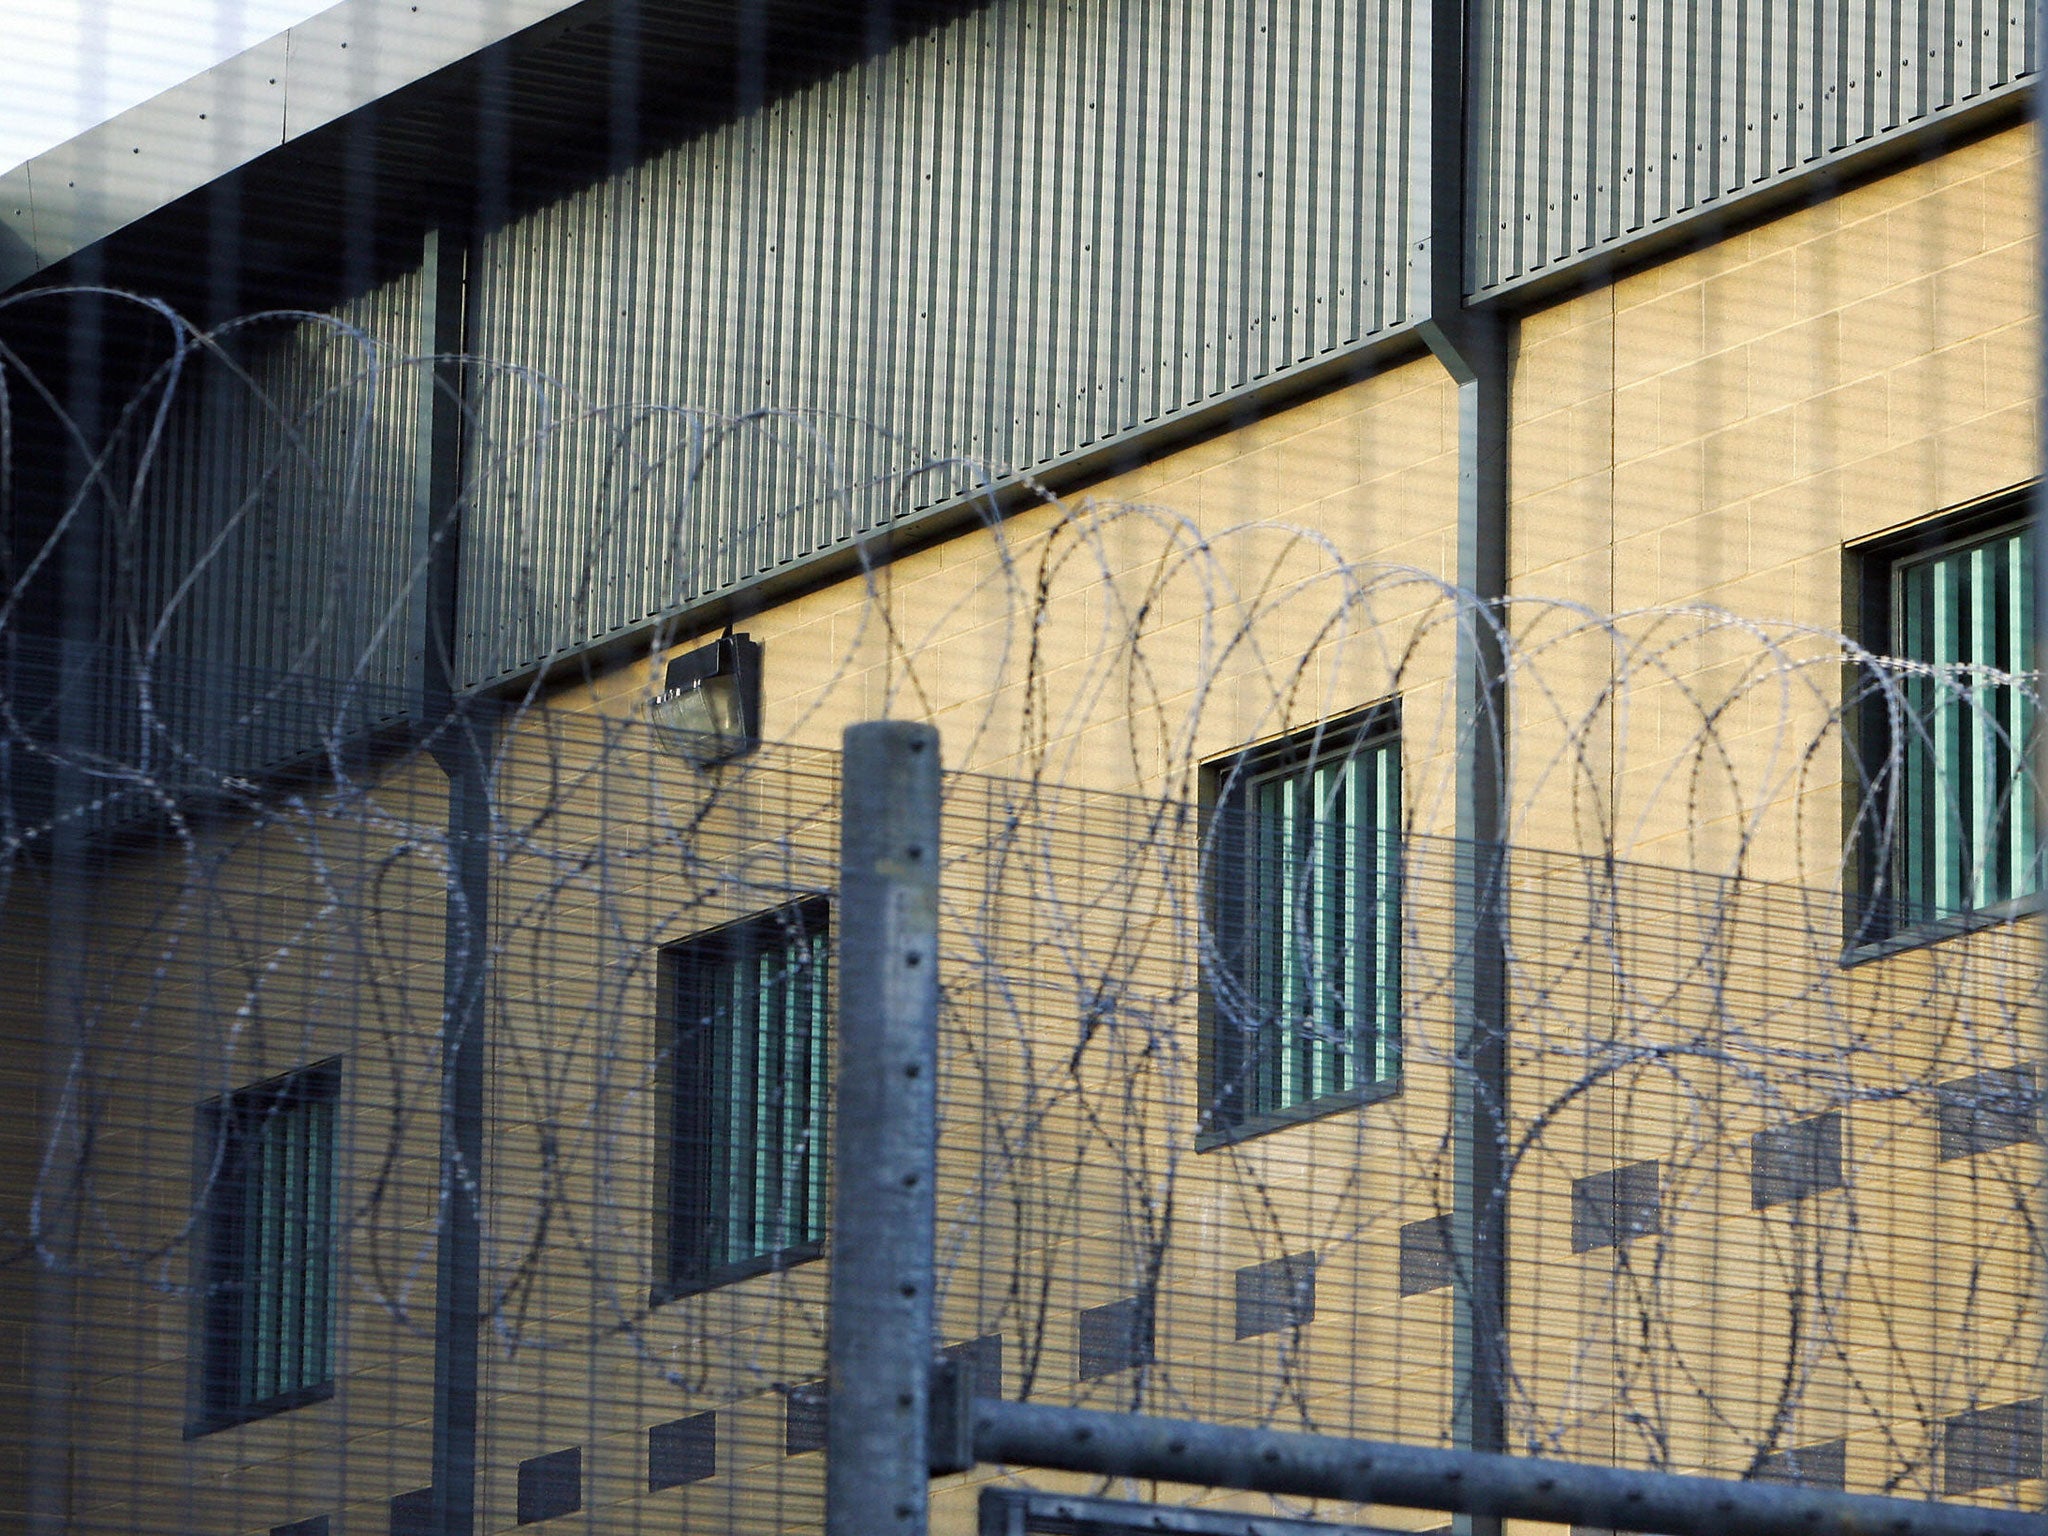 Harmondsworth immigration removal centre (IRC) at Heathrow holds large numbers of men with mental health problems in prison-like conditions, and continues to show “considerable failings” in safety and respect for detainees, prison inspectors warn